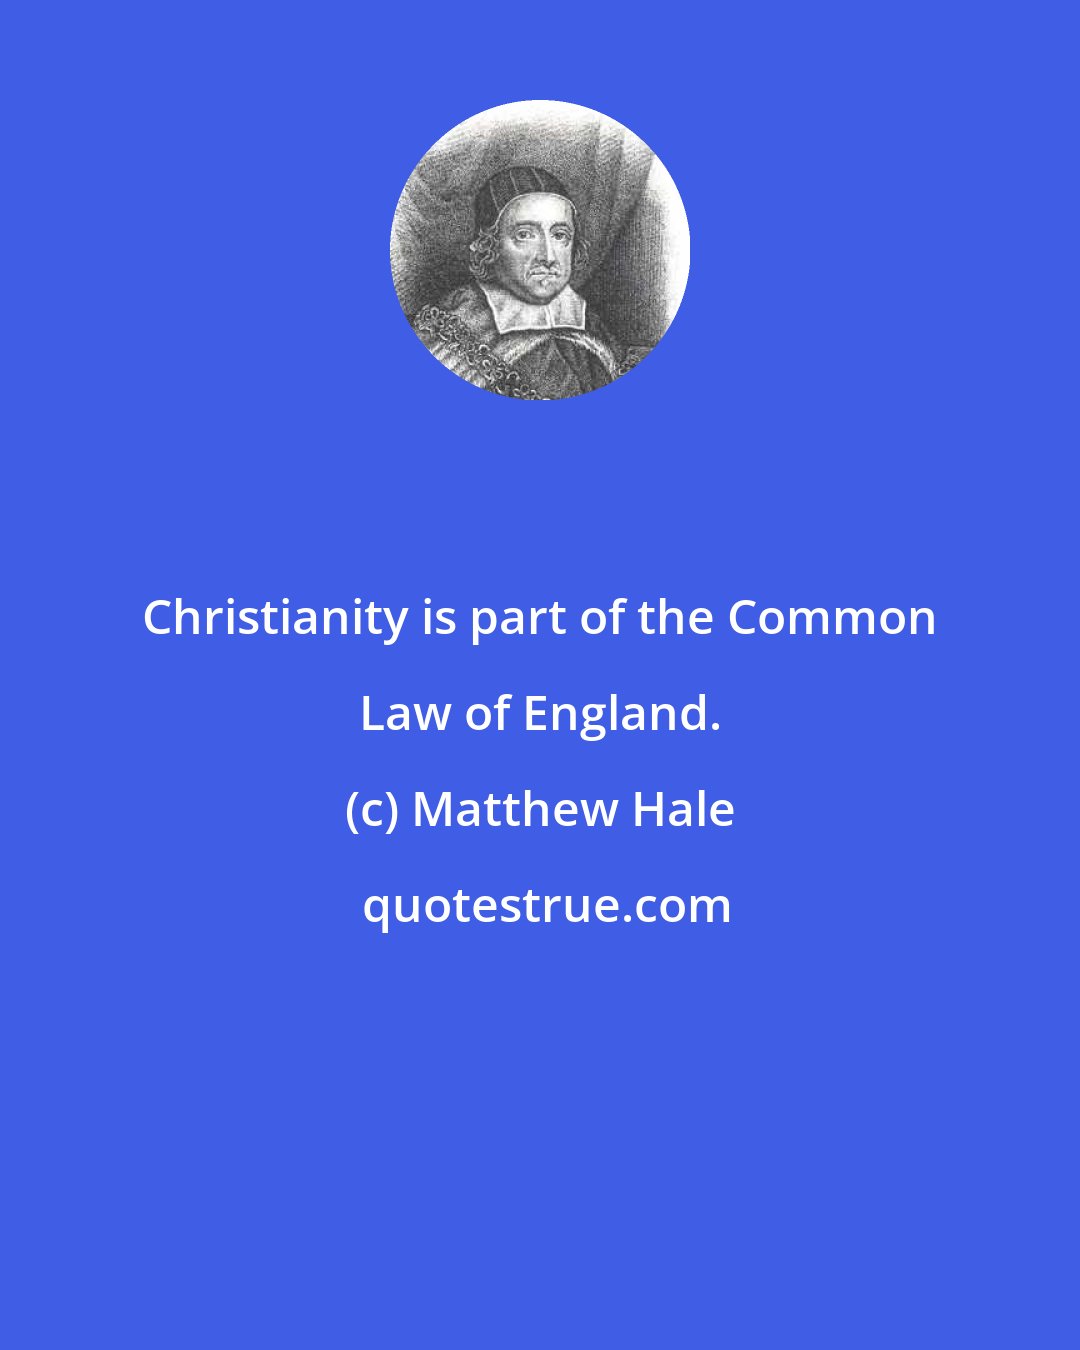 Matthew Hale: Christianity is part of the Common Law of England.